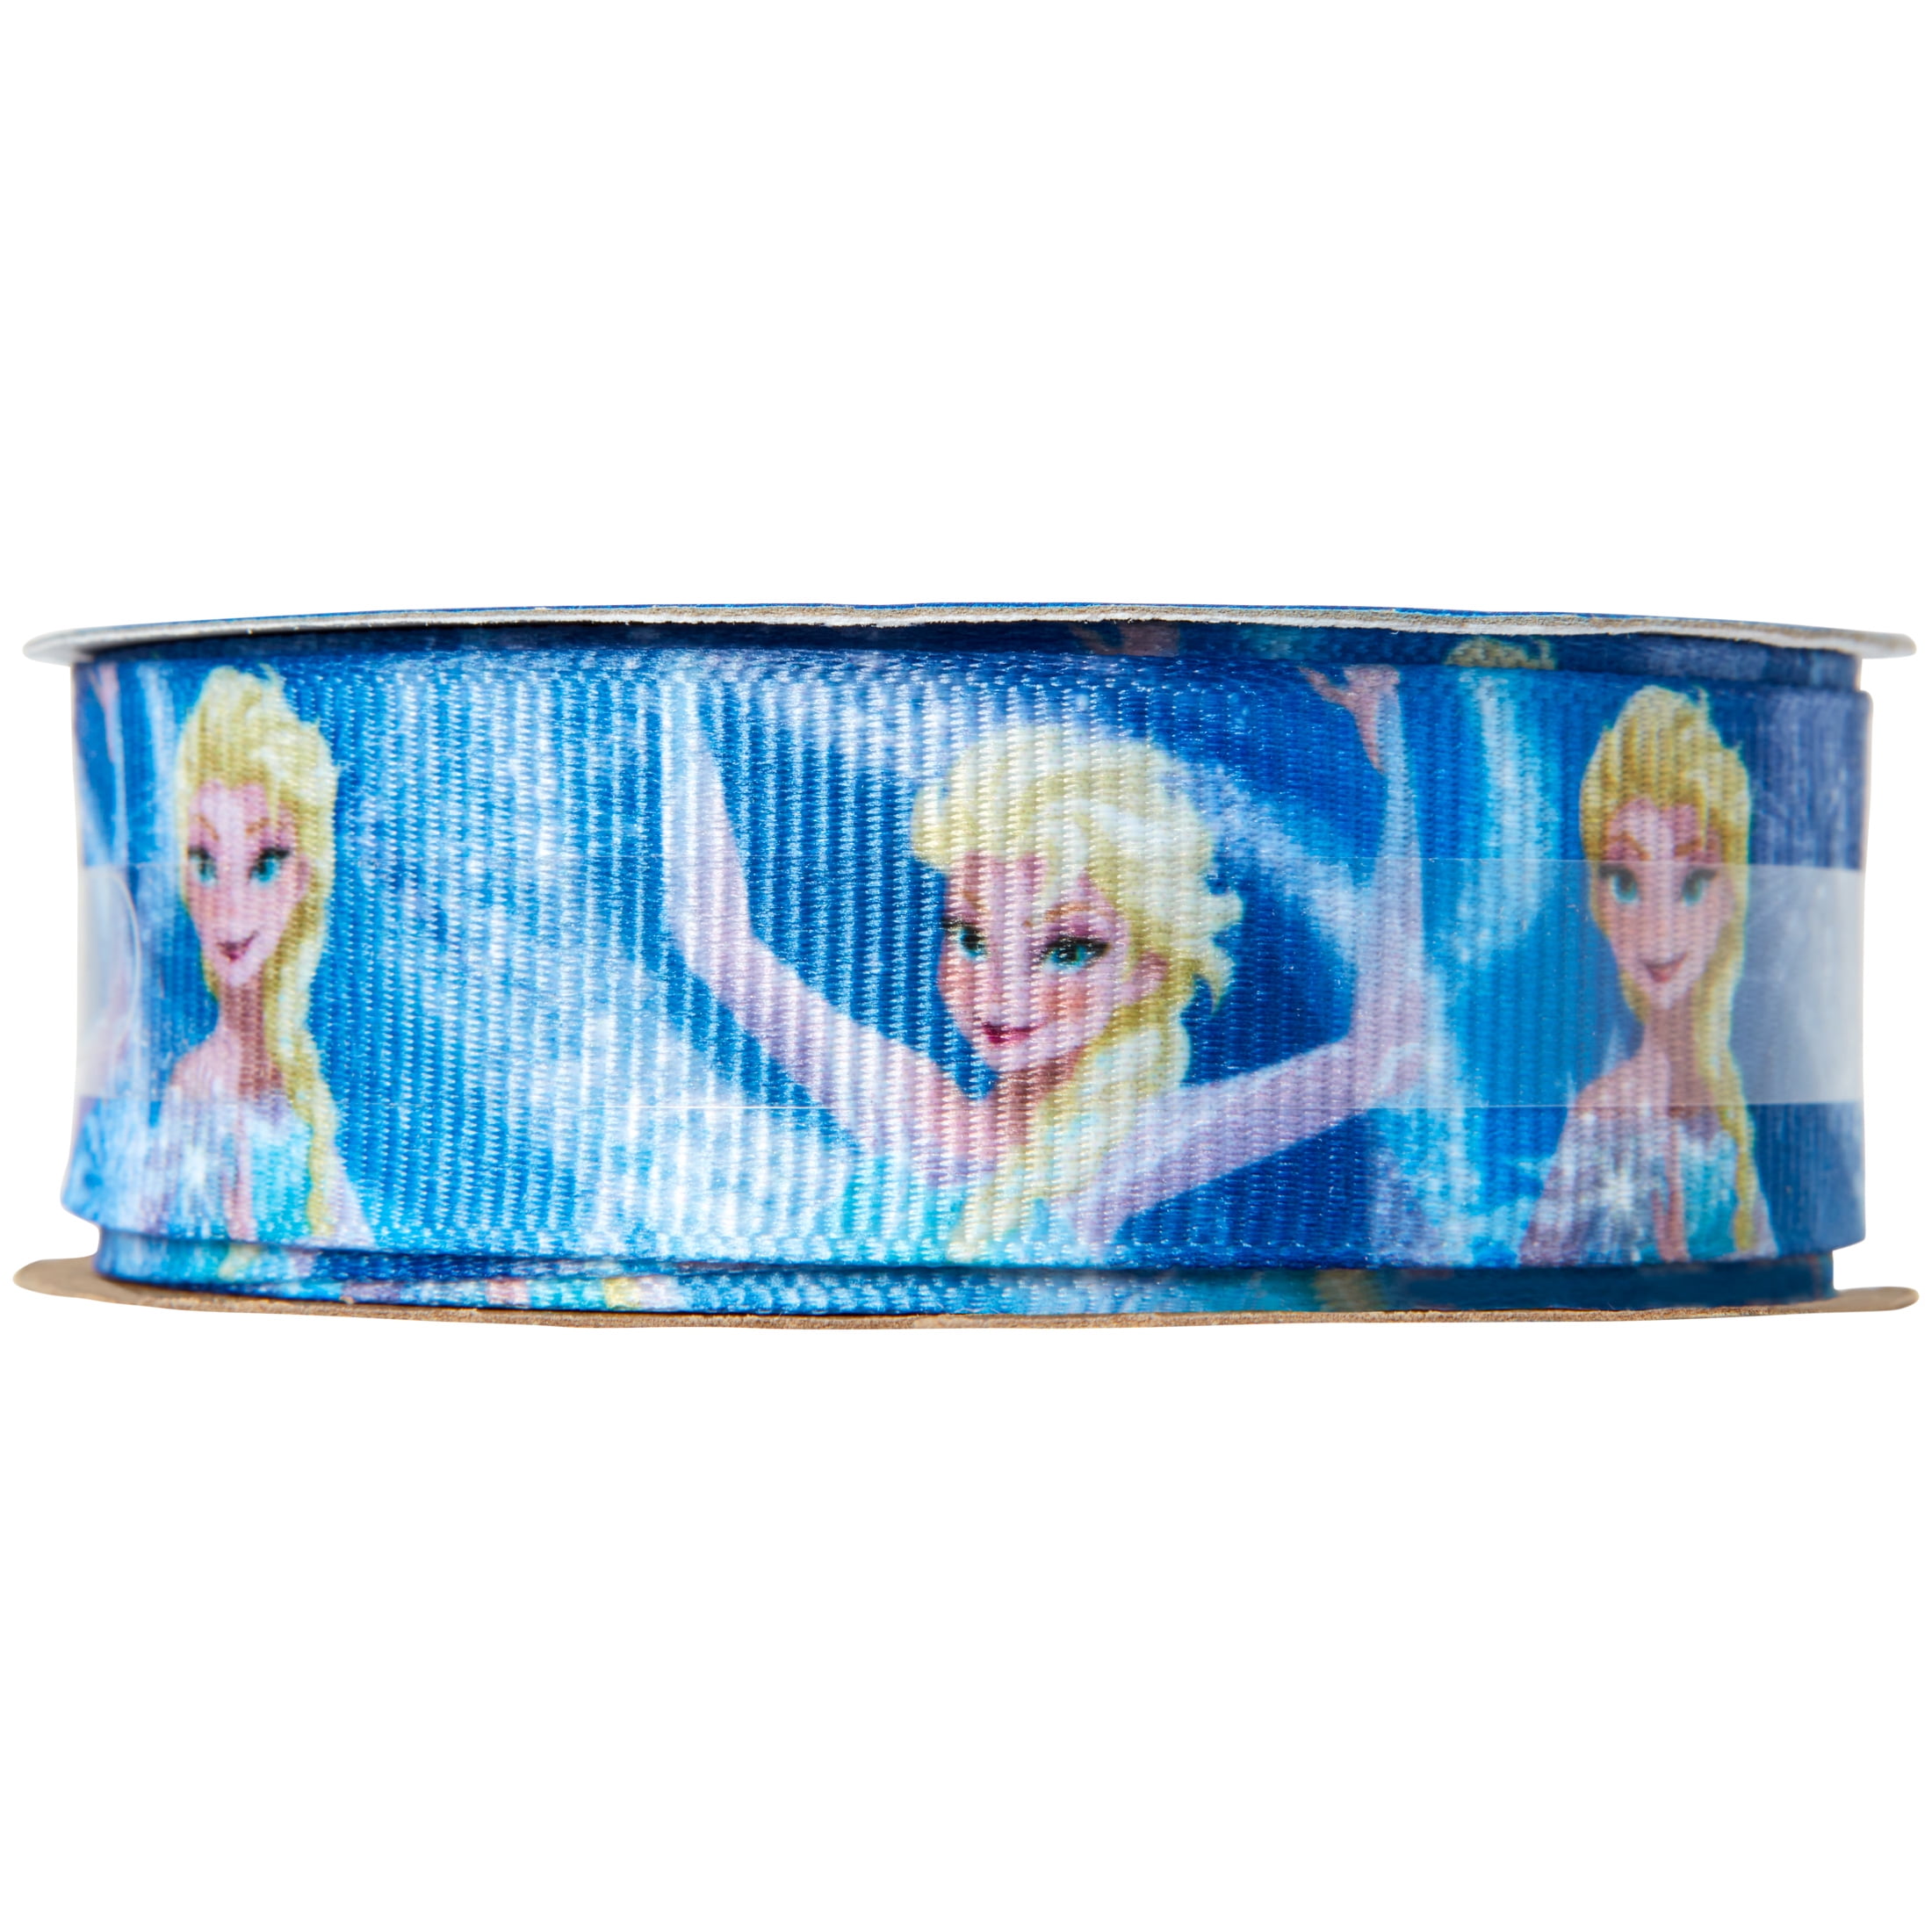 Character Ribbons - Frozen, Minnie Mouse, Disney Princess & more!